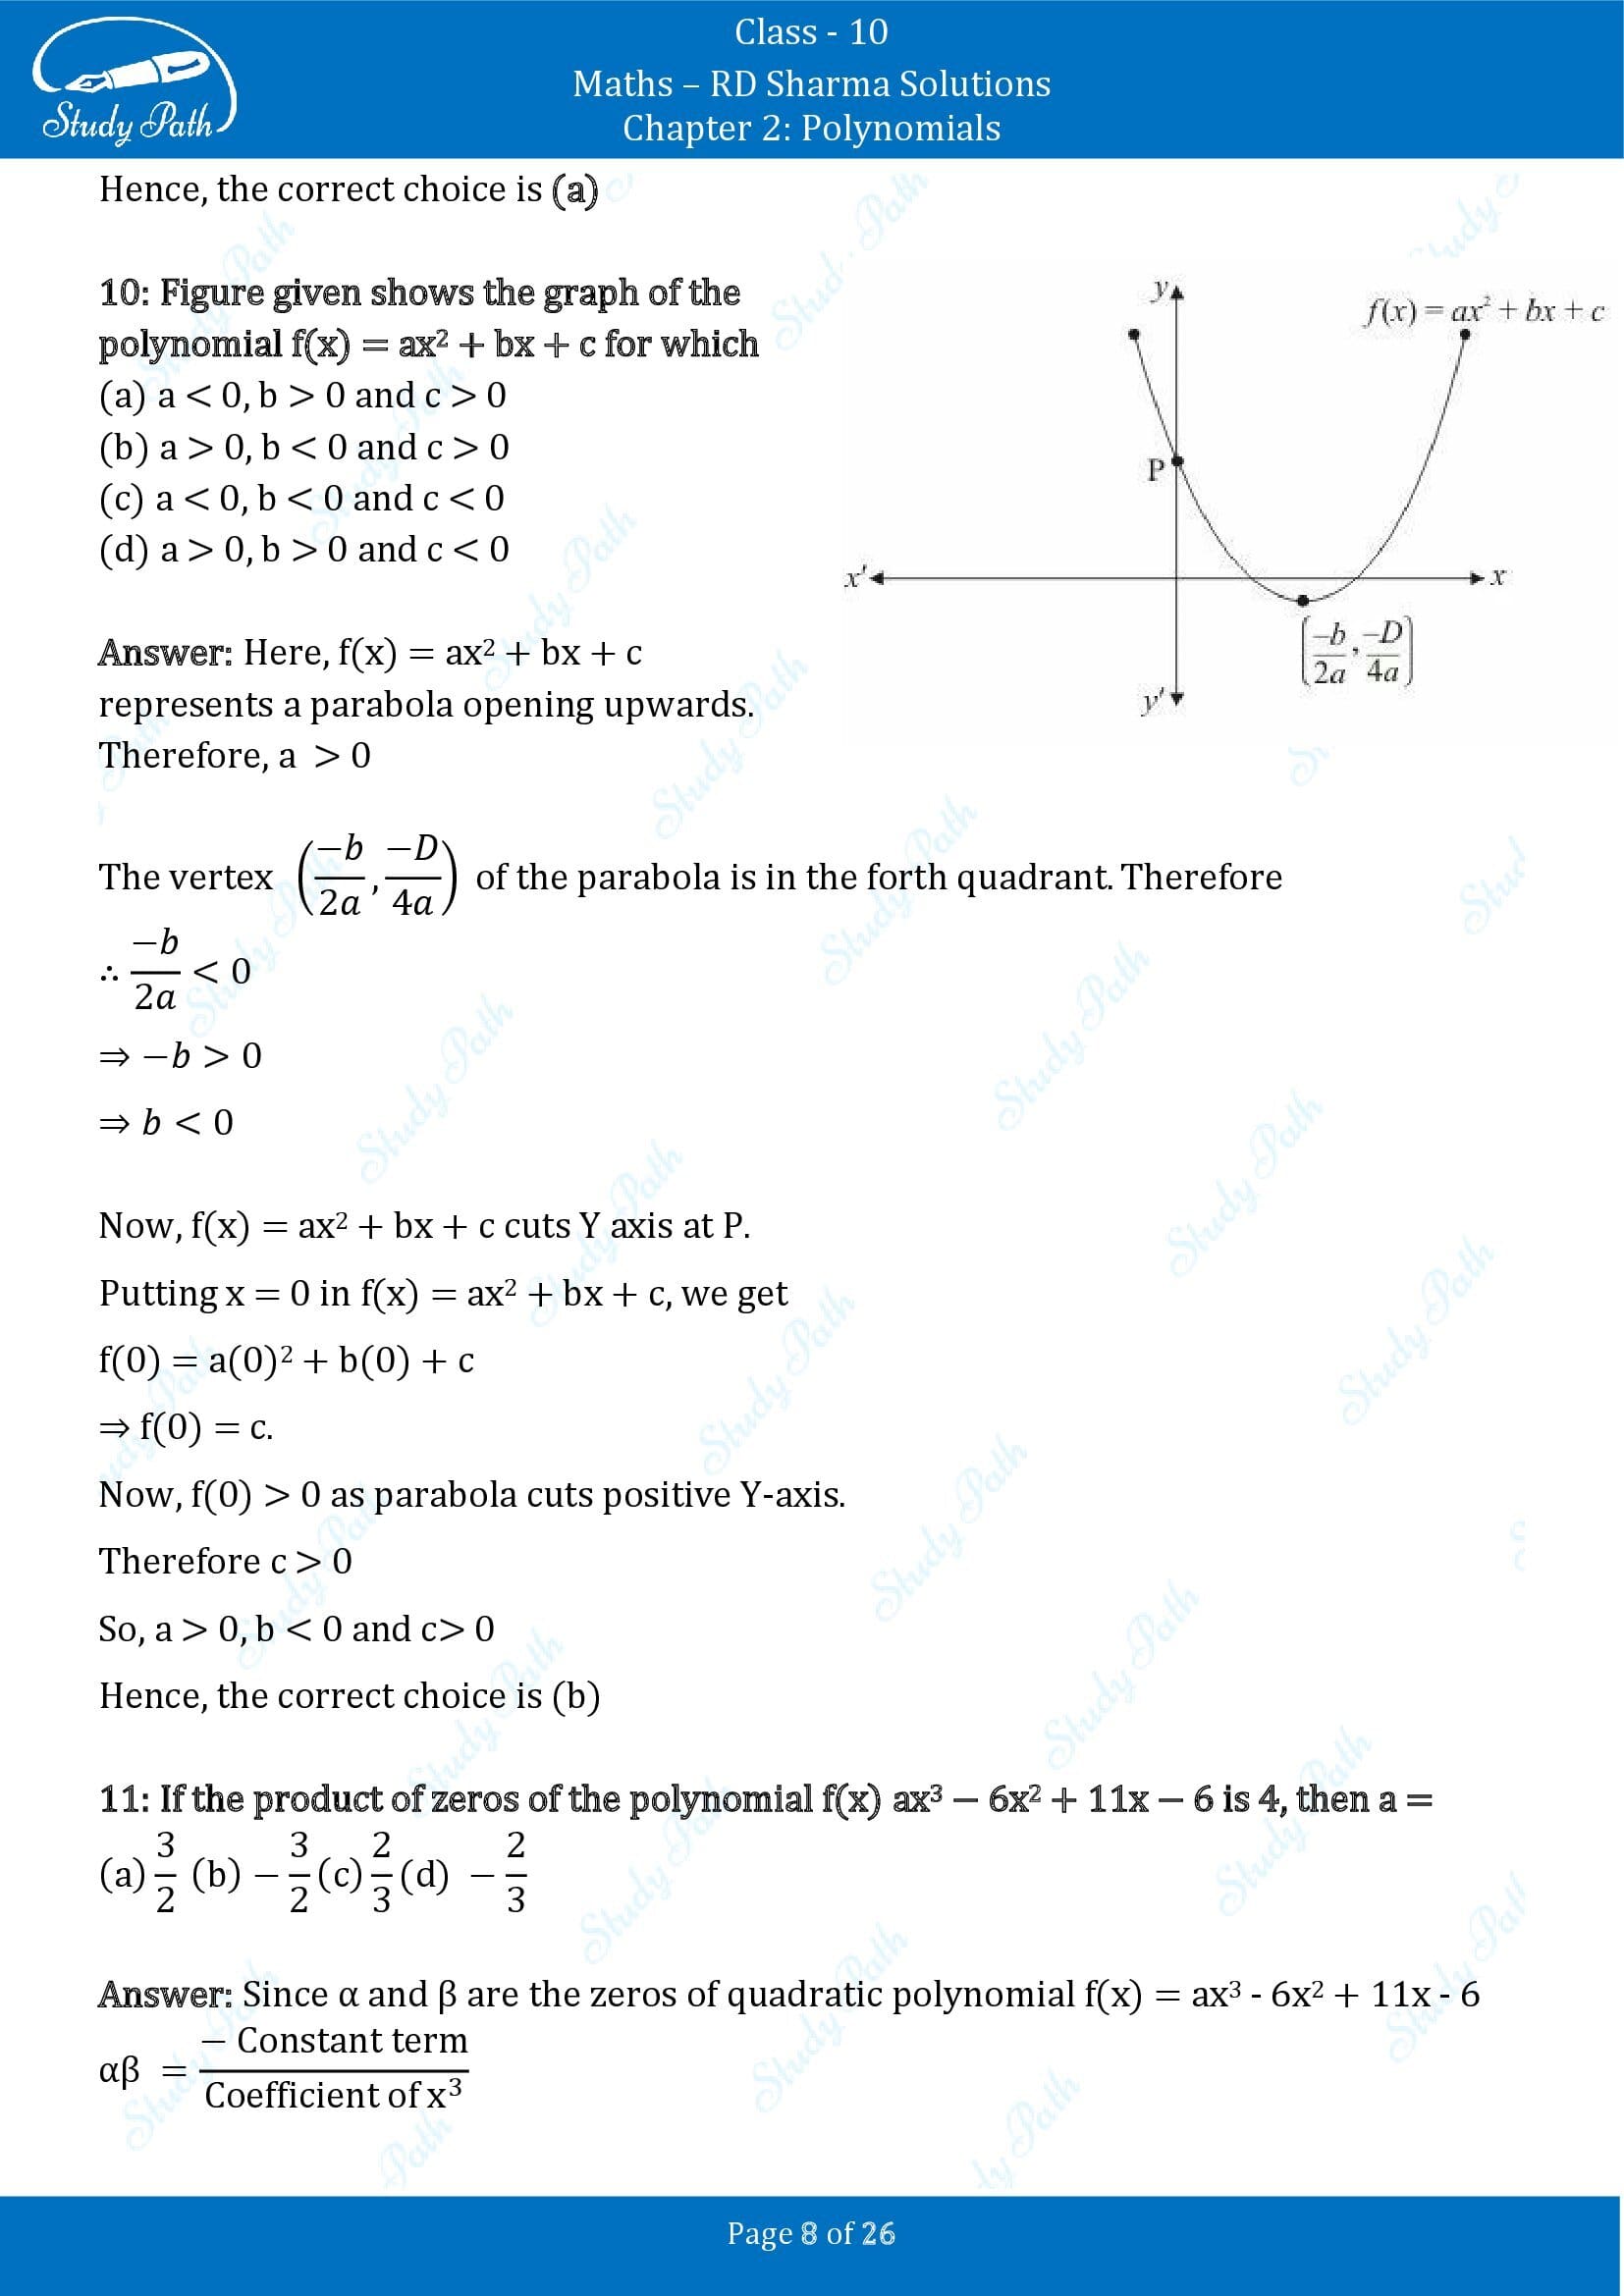 RD Sharma Solutions Class 10 Chapter 2 Polynomials Multiple Choice Questions MCQs 00008